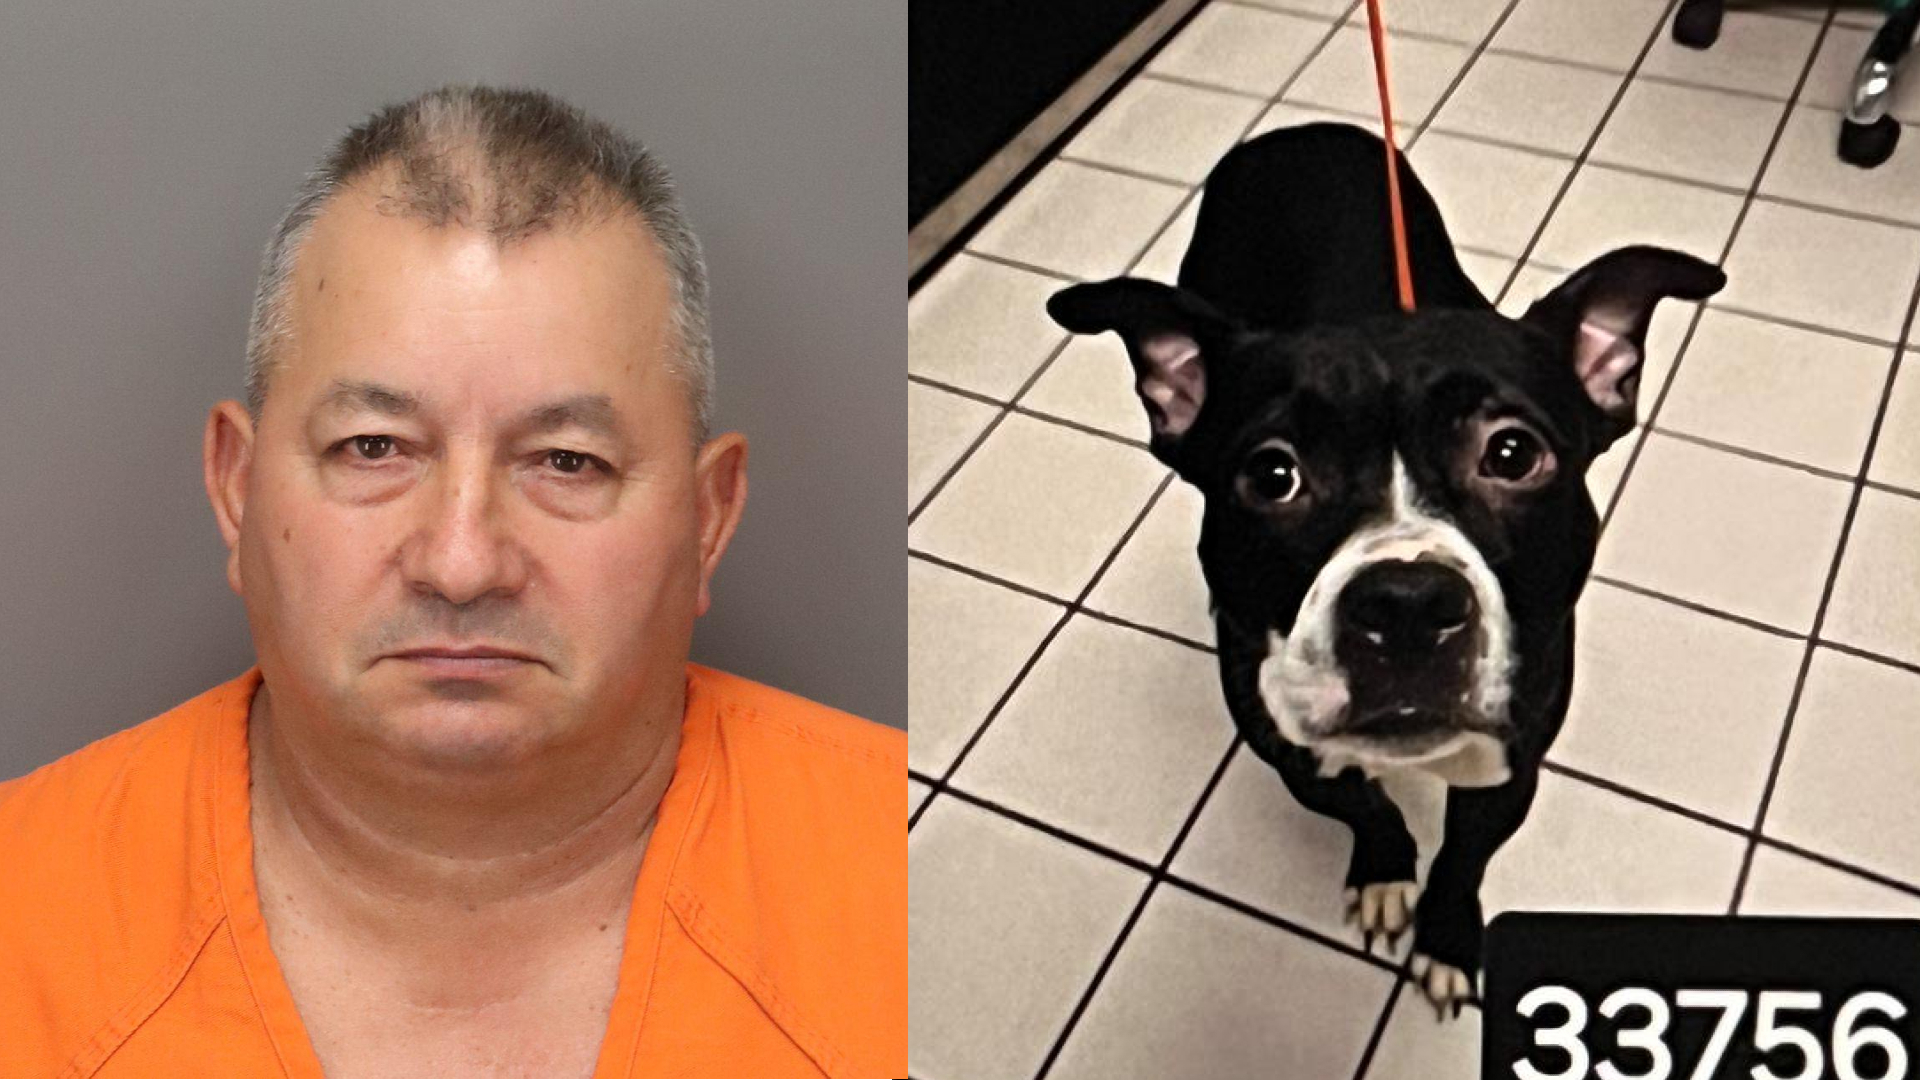 Pinellas County deputies arrested the dog's owner, Domingo Rodriguez, who adopted "Dexter" a day before he was found dead at the park.